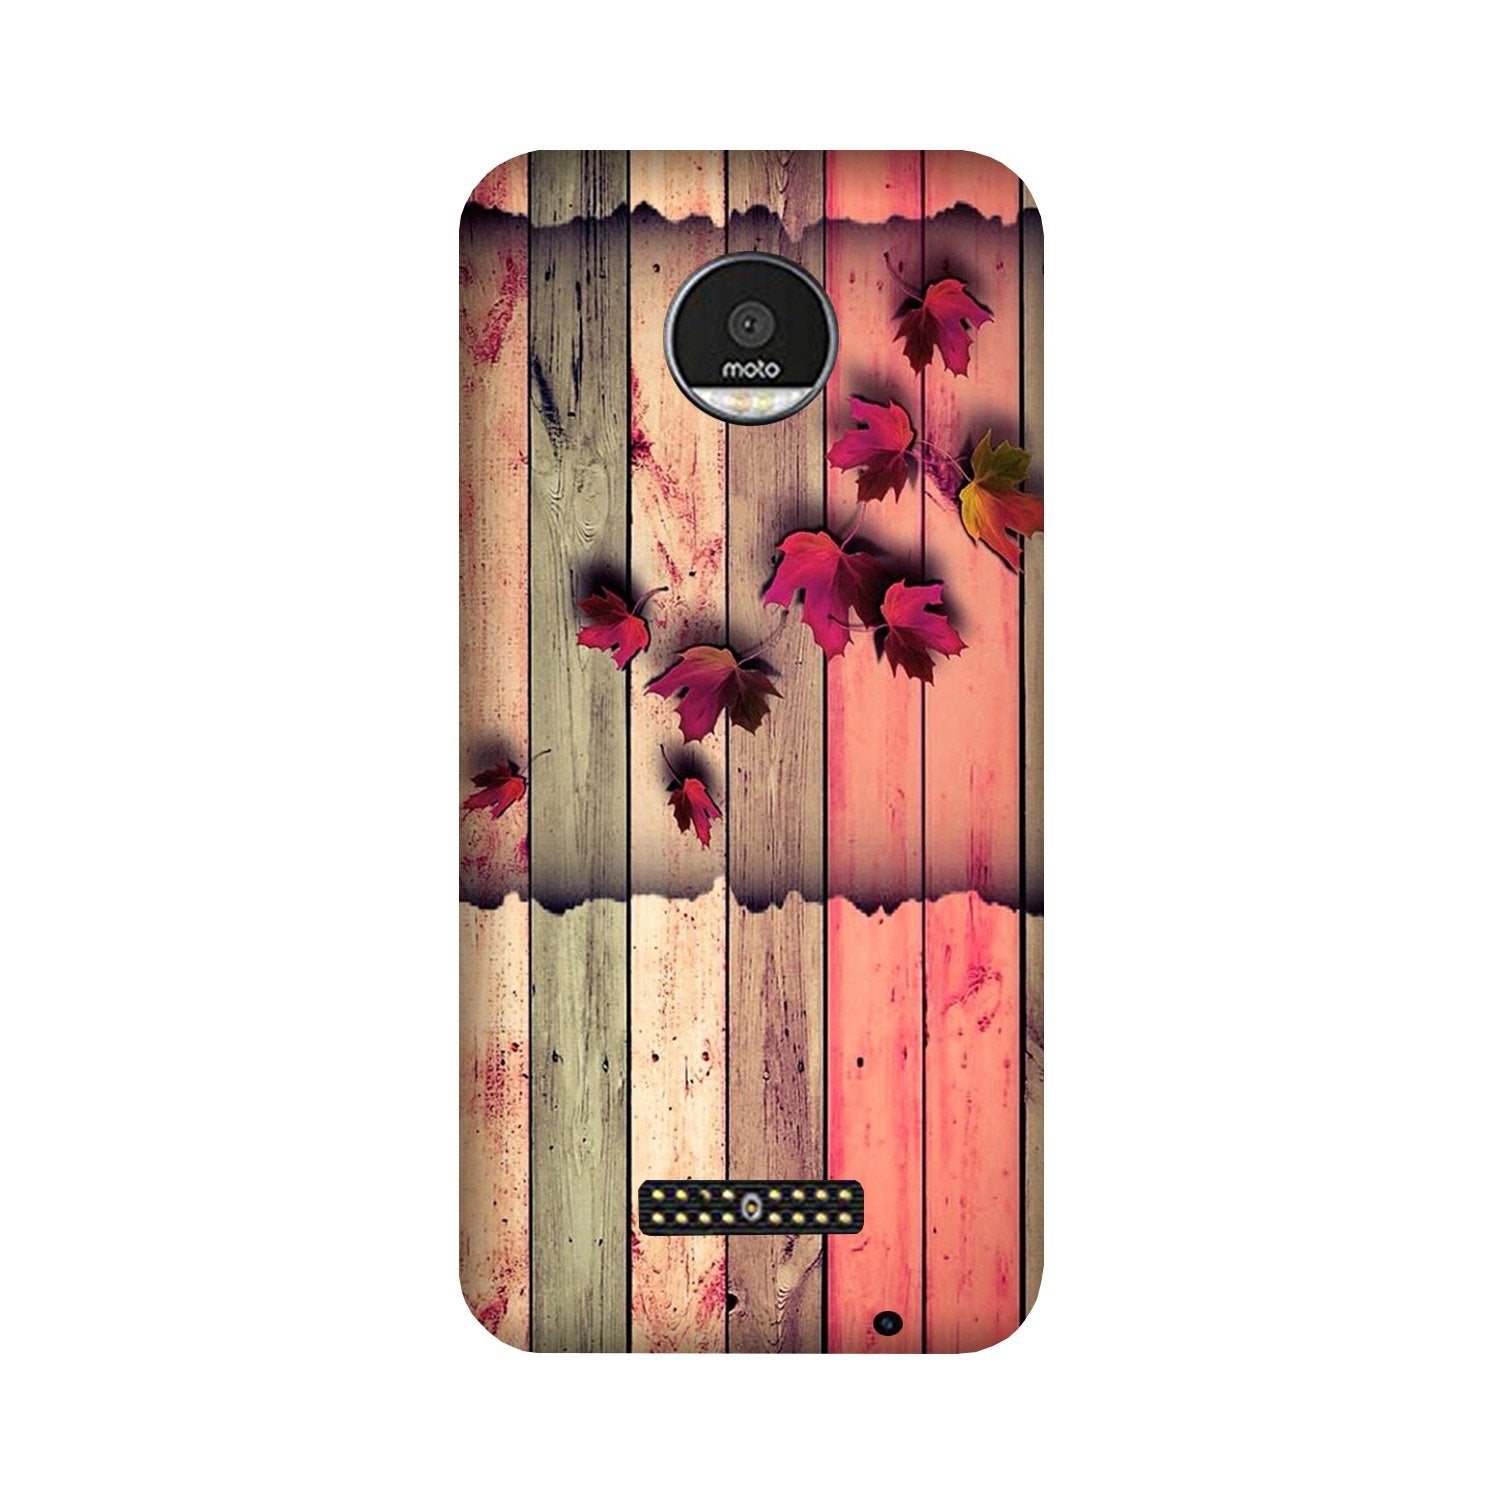 Wooden look2 Case for Moto Z2 Play